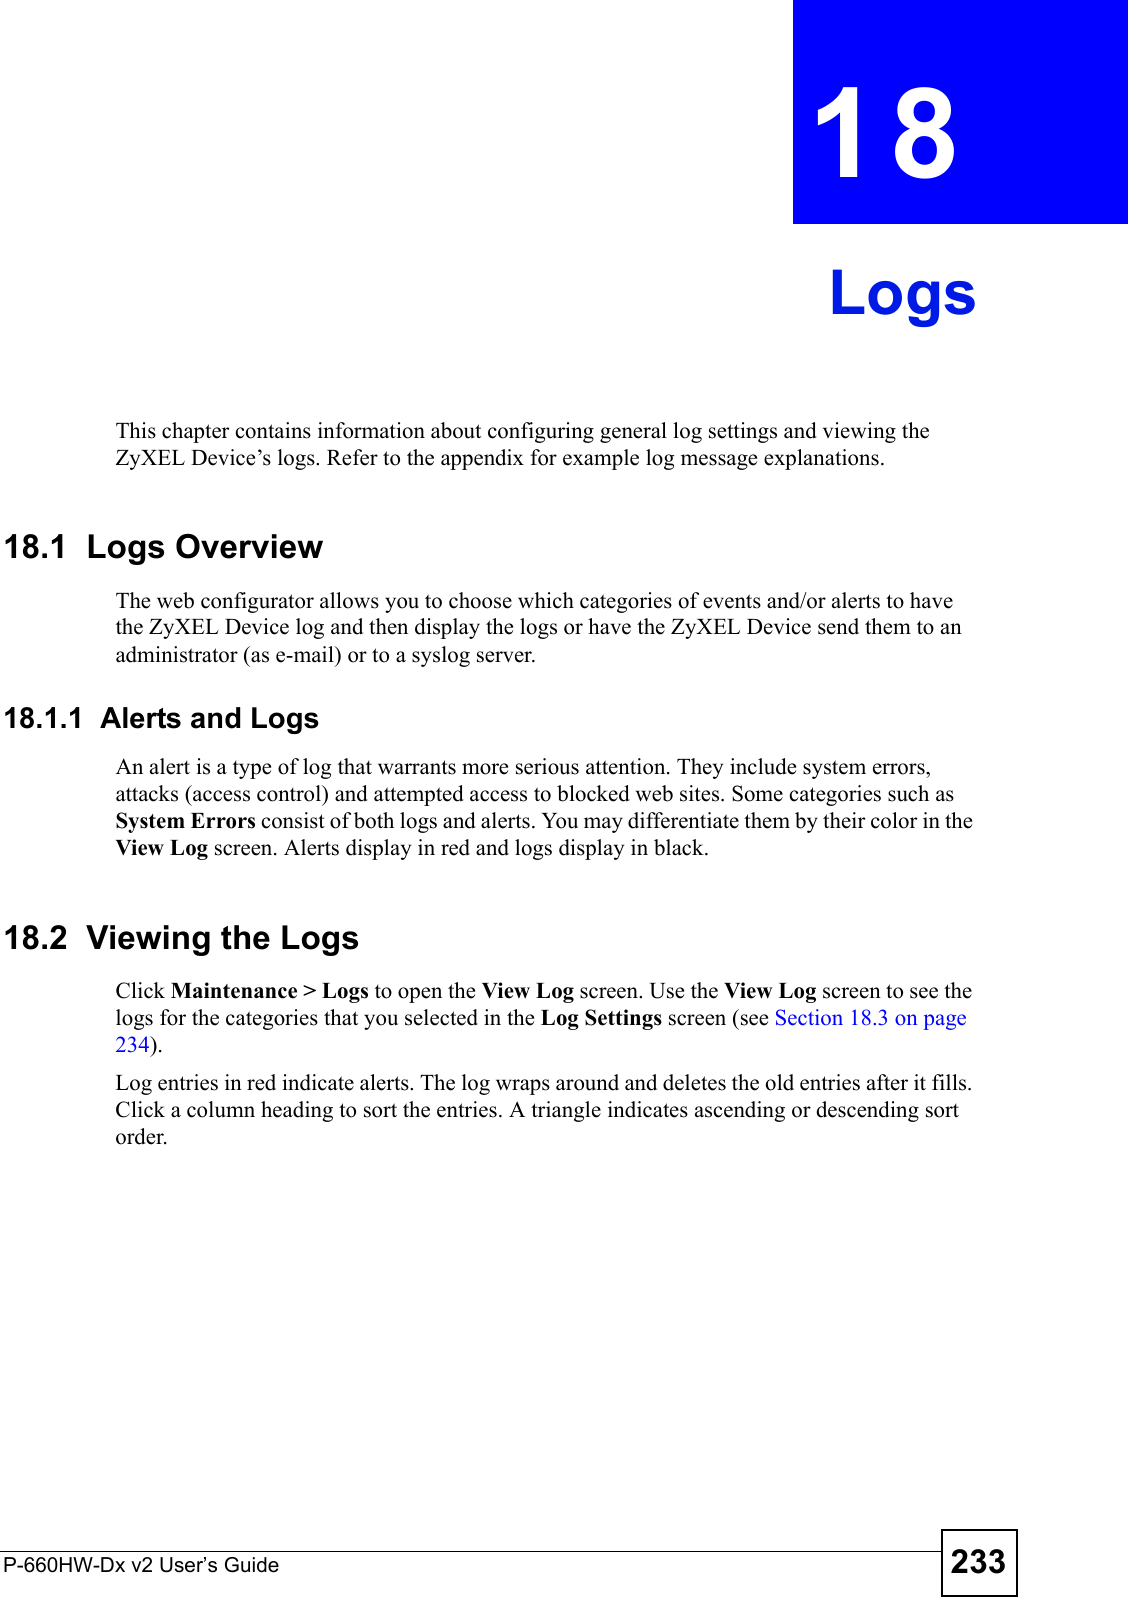 P-660HW-Dx v2 User’s Guide 233CHAPTER  18 LogsThis chapter contains information about configuring general log settings and viewing the ZyXEL Device’s logs. Refer to the appendix for example log message explanations.18.1  Logs Overview The web configurator allows you to choose which categories of events and/or alerts to have the ZyXEL Device log and then display the logs or have the ZyXEL Device send them to an administrator (as e-mail) or to a syslog server. 18.1.1  Alerts and LogsAn alert is a type of log that warrants more serious attention. They include system errors, attacks (access control) and attempted access to blocked web sites. Some categories such as System Errors consist of both logs and alerts. You may differentiate them by their color in the View Log screen. Alerts display in red and logs display in black.18.2  Viewing the LogsClick Maintenance &gt; Logs to open the View Log screen. Use the View Log screen to see the logs for the categories that you selected in the Log Settings screen (see Section 18.3 on page 234). Log entries in red indicate alerts. The log wraps around and deletes the old entries after it fills. Click a column heading to sort the entries. A triangle indicates ascending or descending sort order. 